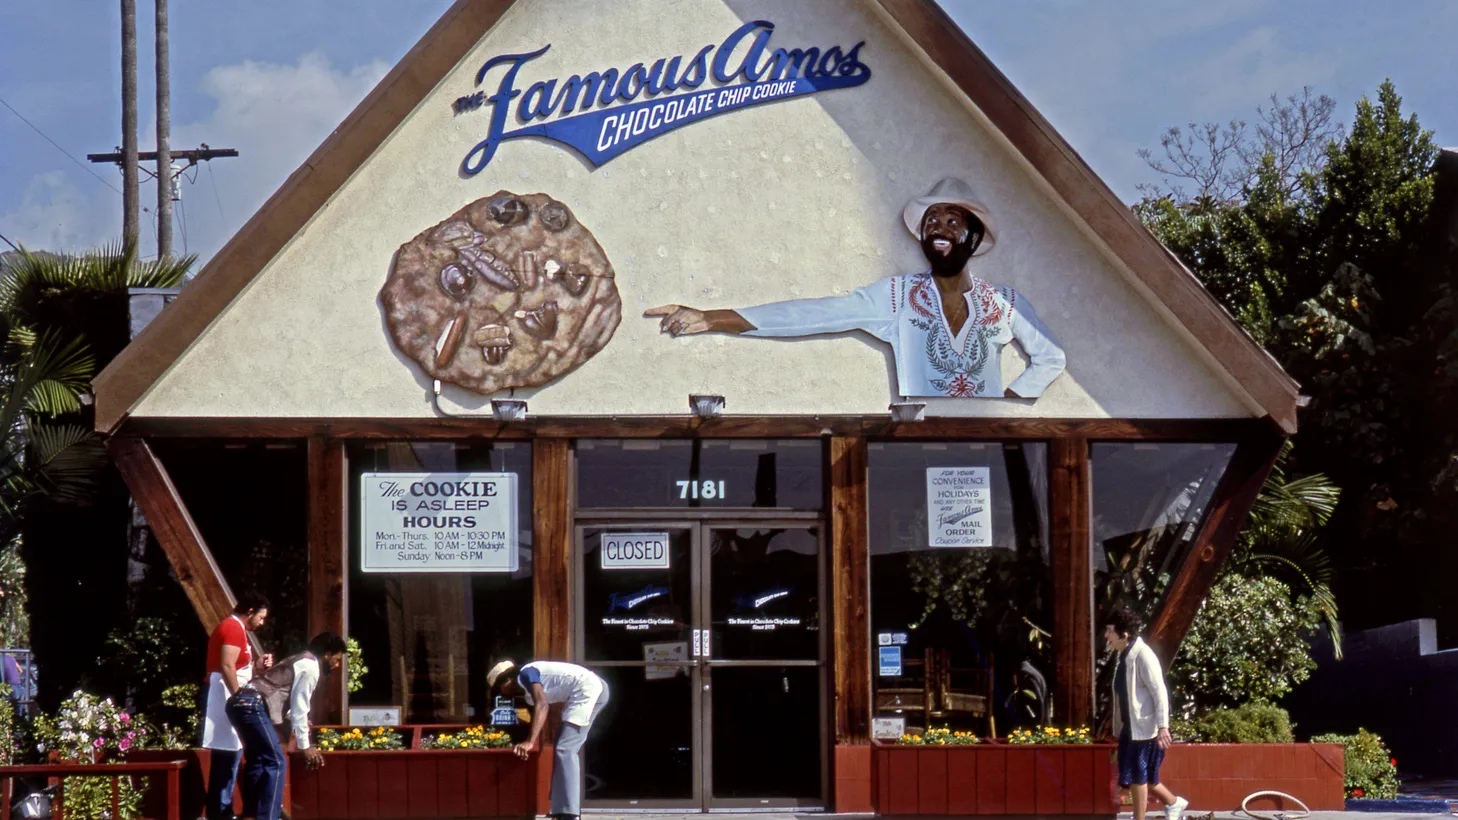 The original Famous Amos was opened by Wallace “Wally” Amos, Jr. on Hollywood’s Sunset Strip in 1975.